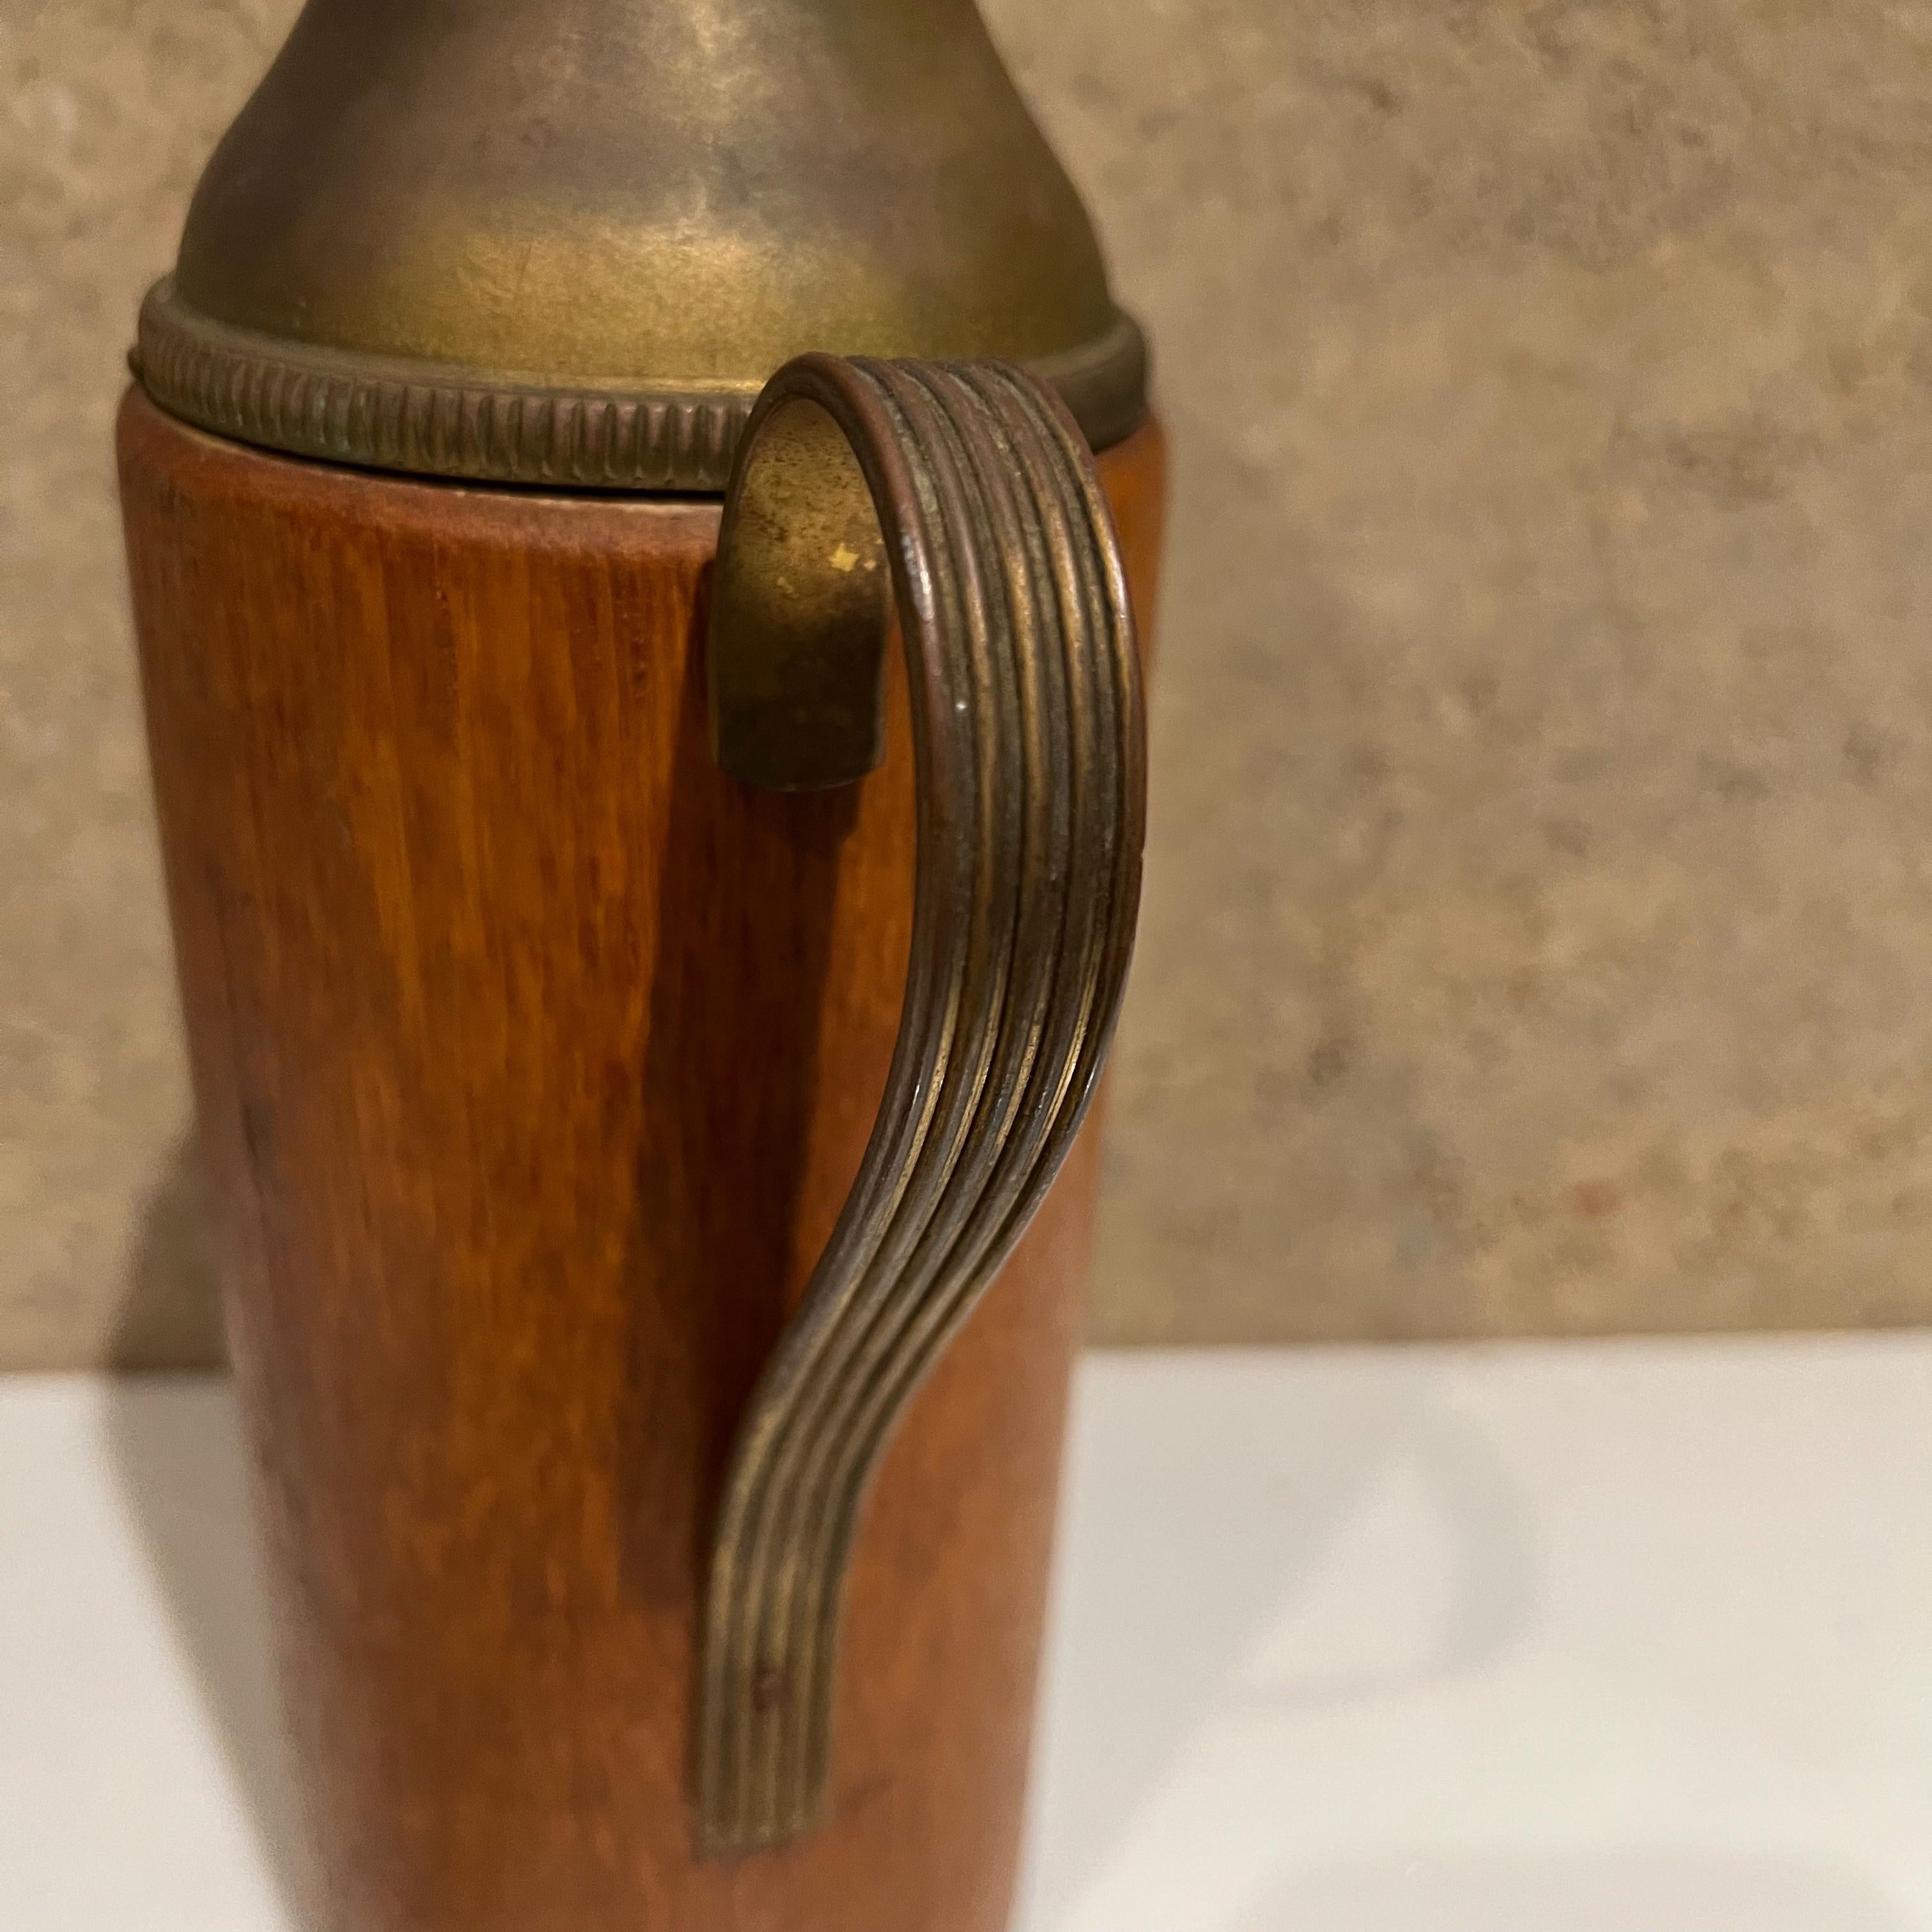 Mid-20th Century Aldo Tura Sculptural Carafe in Teakwood and Brass Italy, 1950s